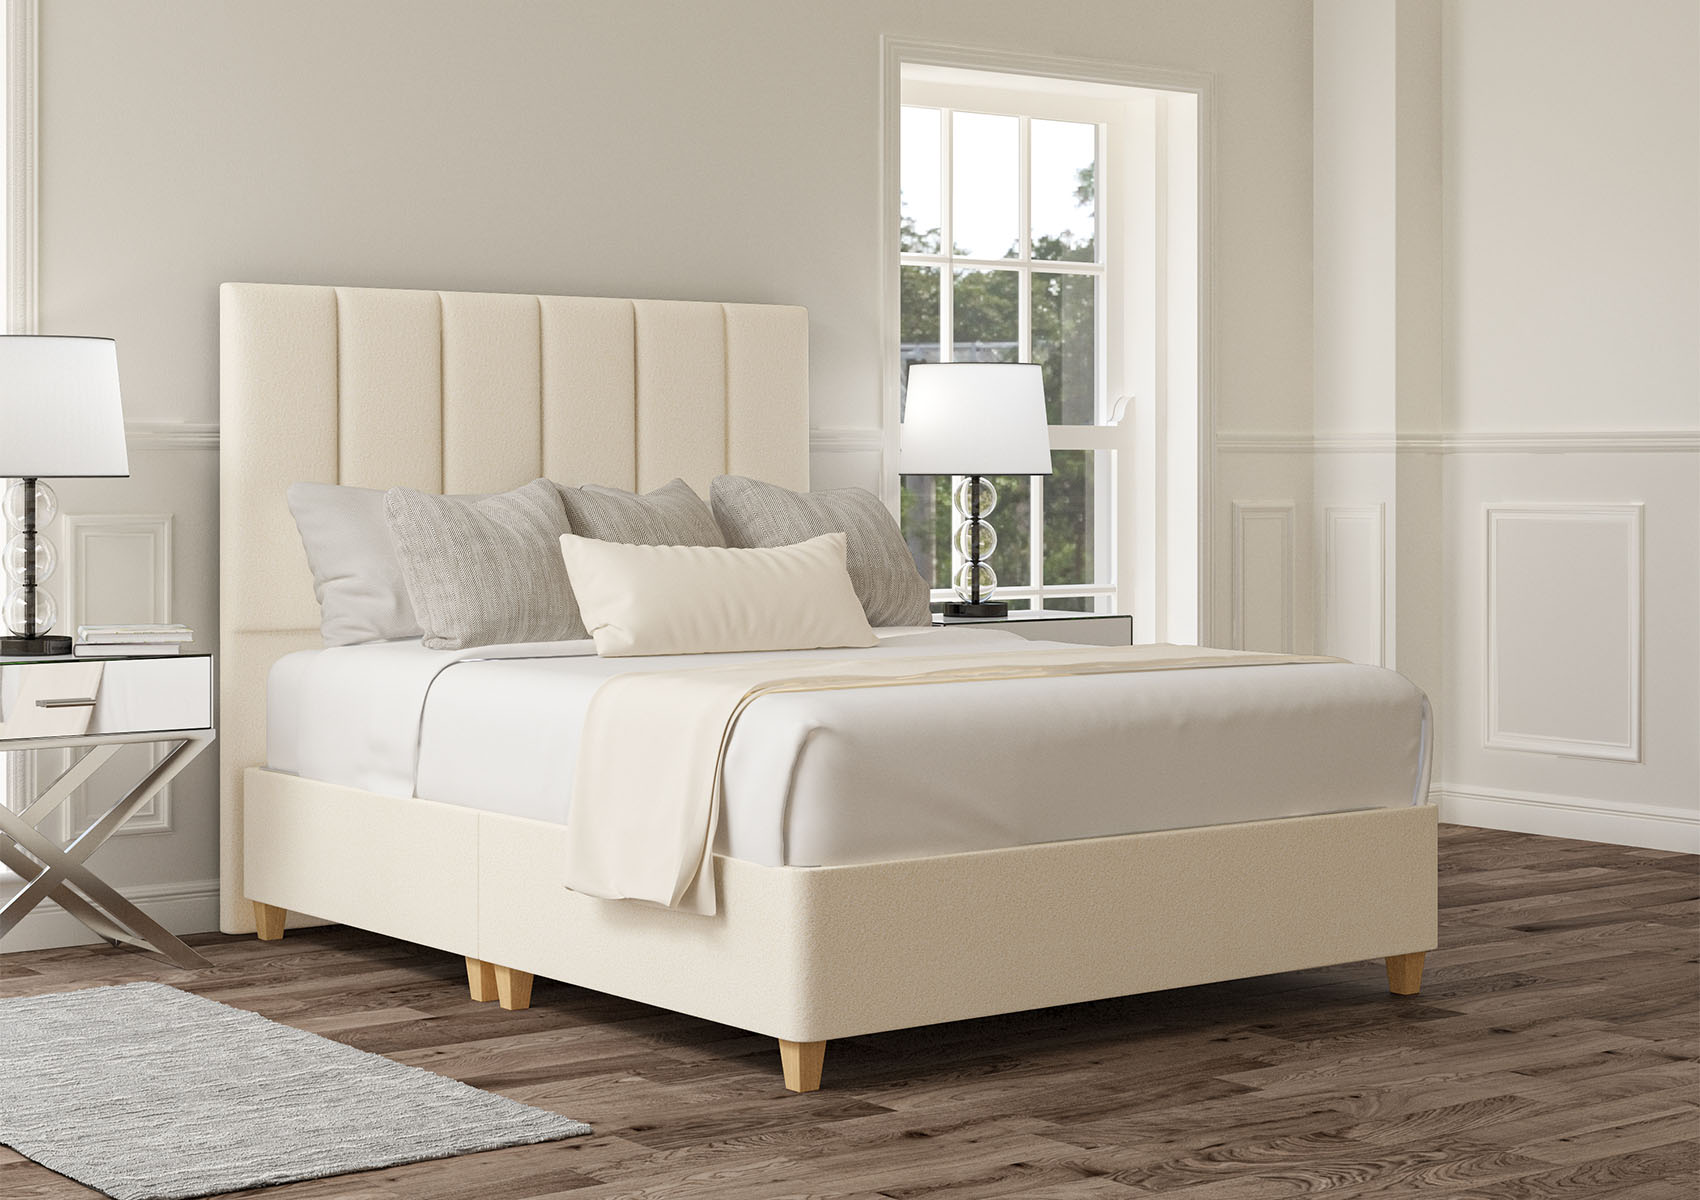 View Empire Arlington Candyfloss Upholstered Single Divan Bed Time4Sleep information